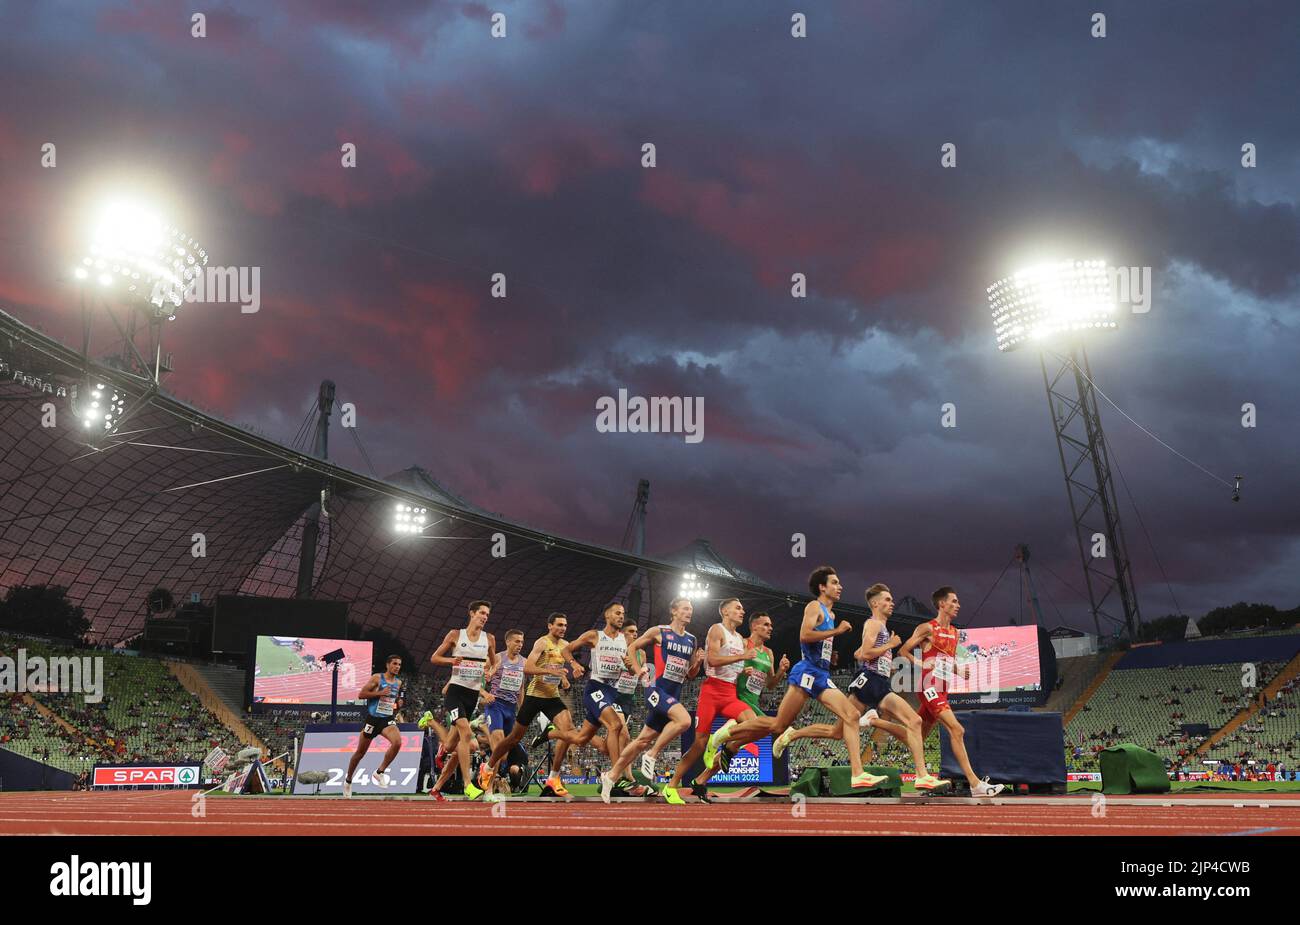 Athletics - 2022 European Championships - Olympiastadion, Munich, Germany - August 15, 2022  General view during the men's 1500m round 1 heat 2 REUTERS/Wolfgang Rattay Stock Photo